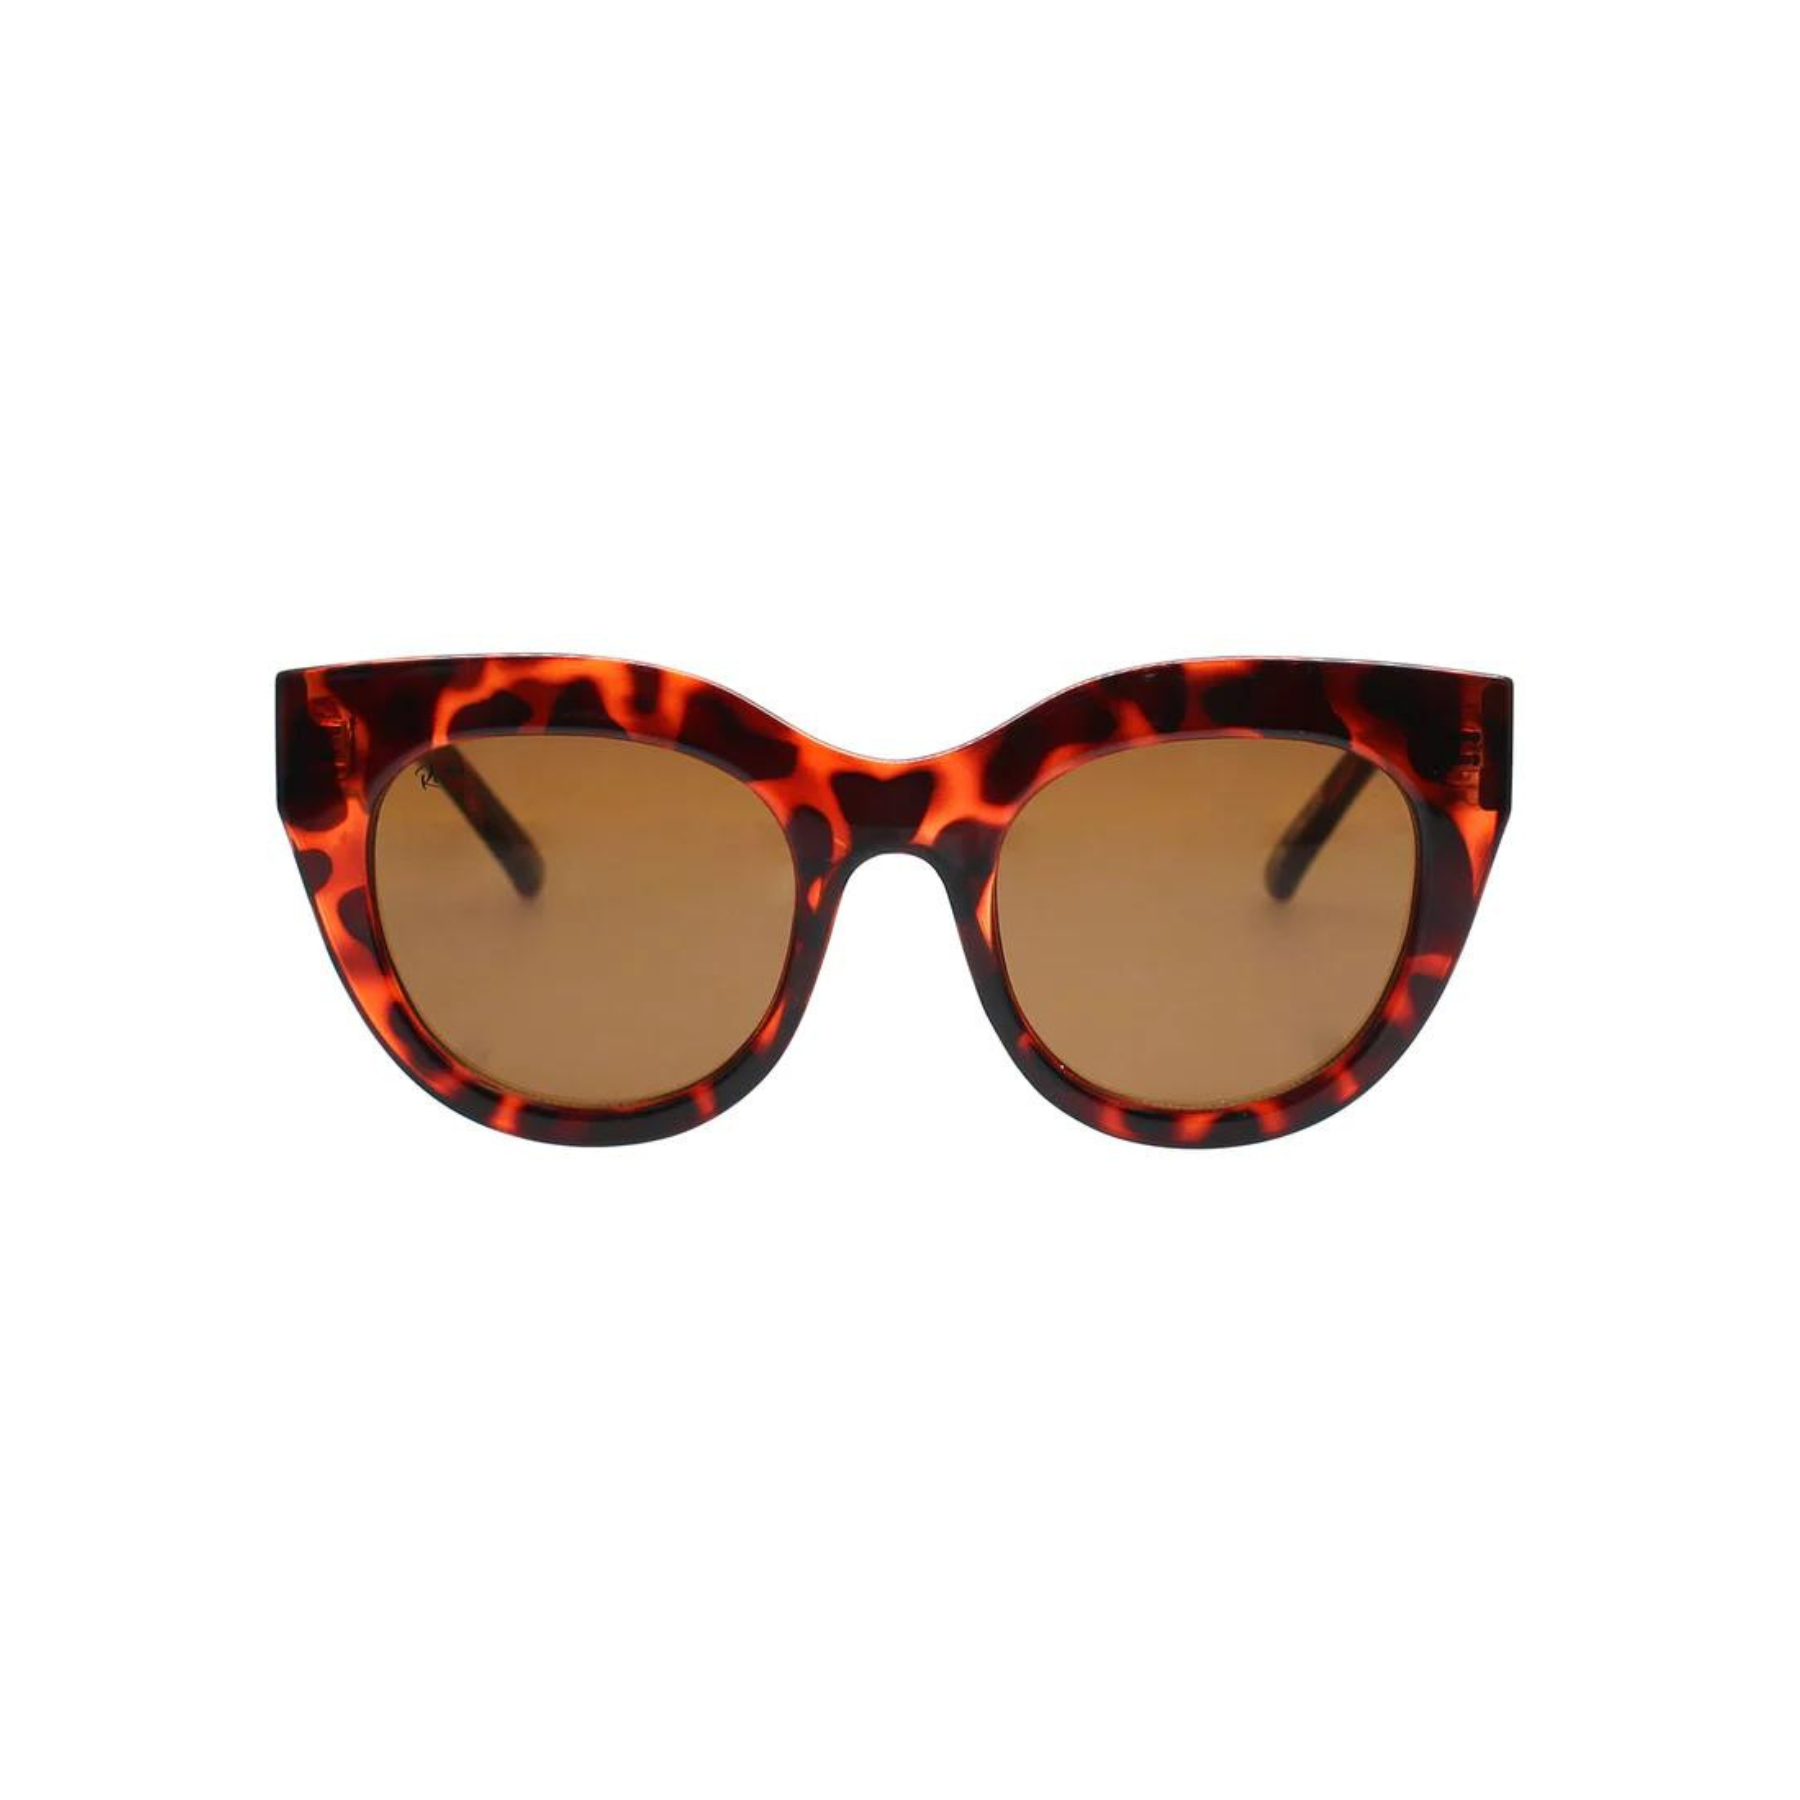 The Forever Turtle sunglasses from Reality Eyewear